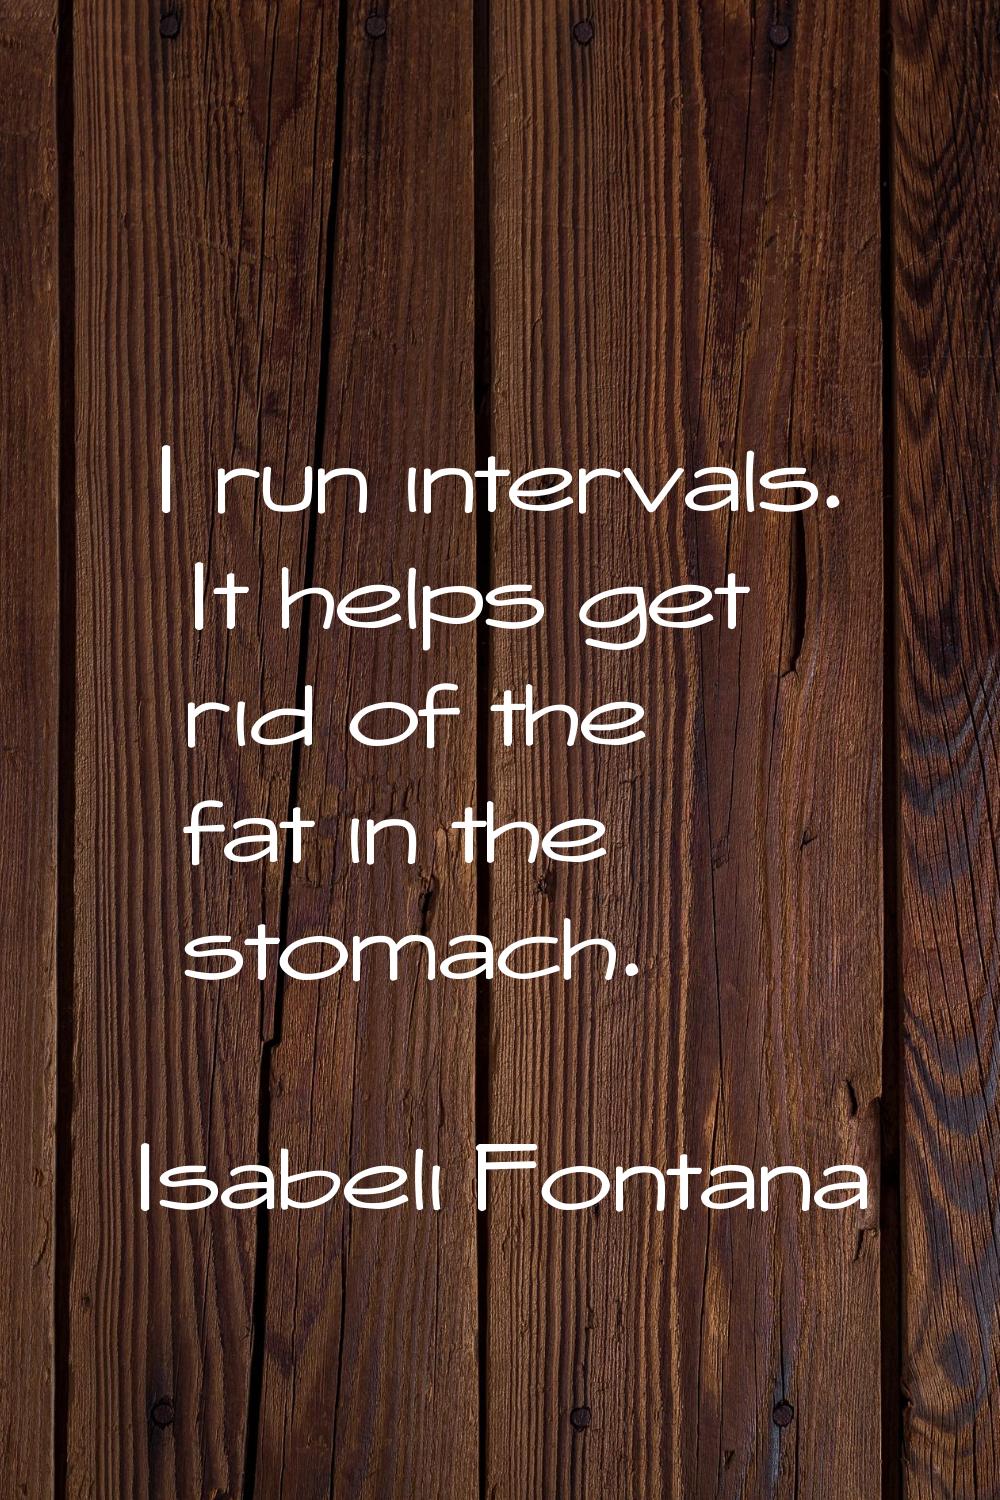 I run intervals. It helps get rid of the fat in the stomach.